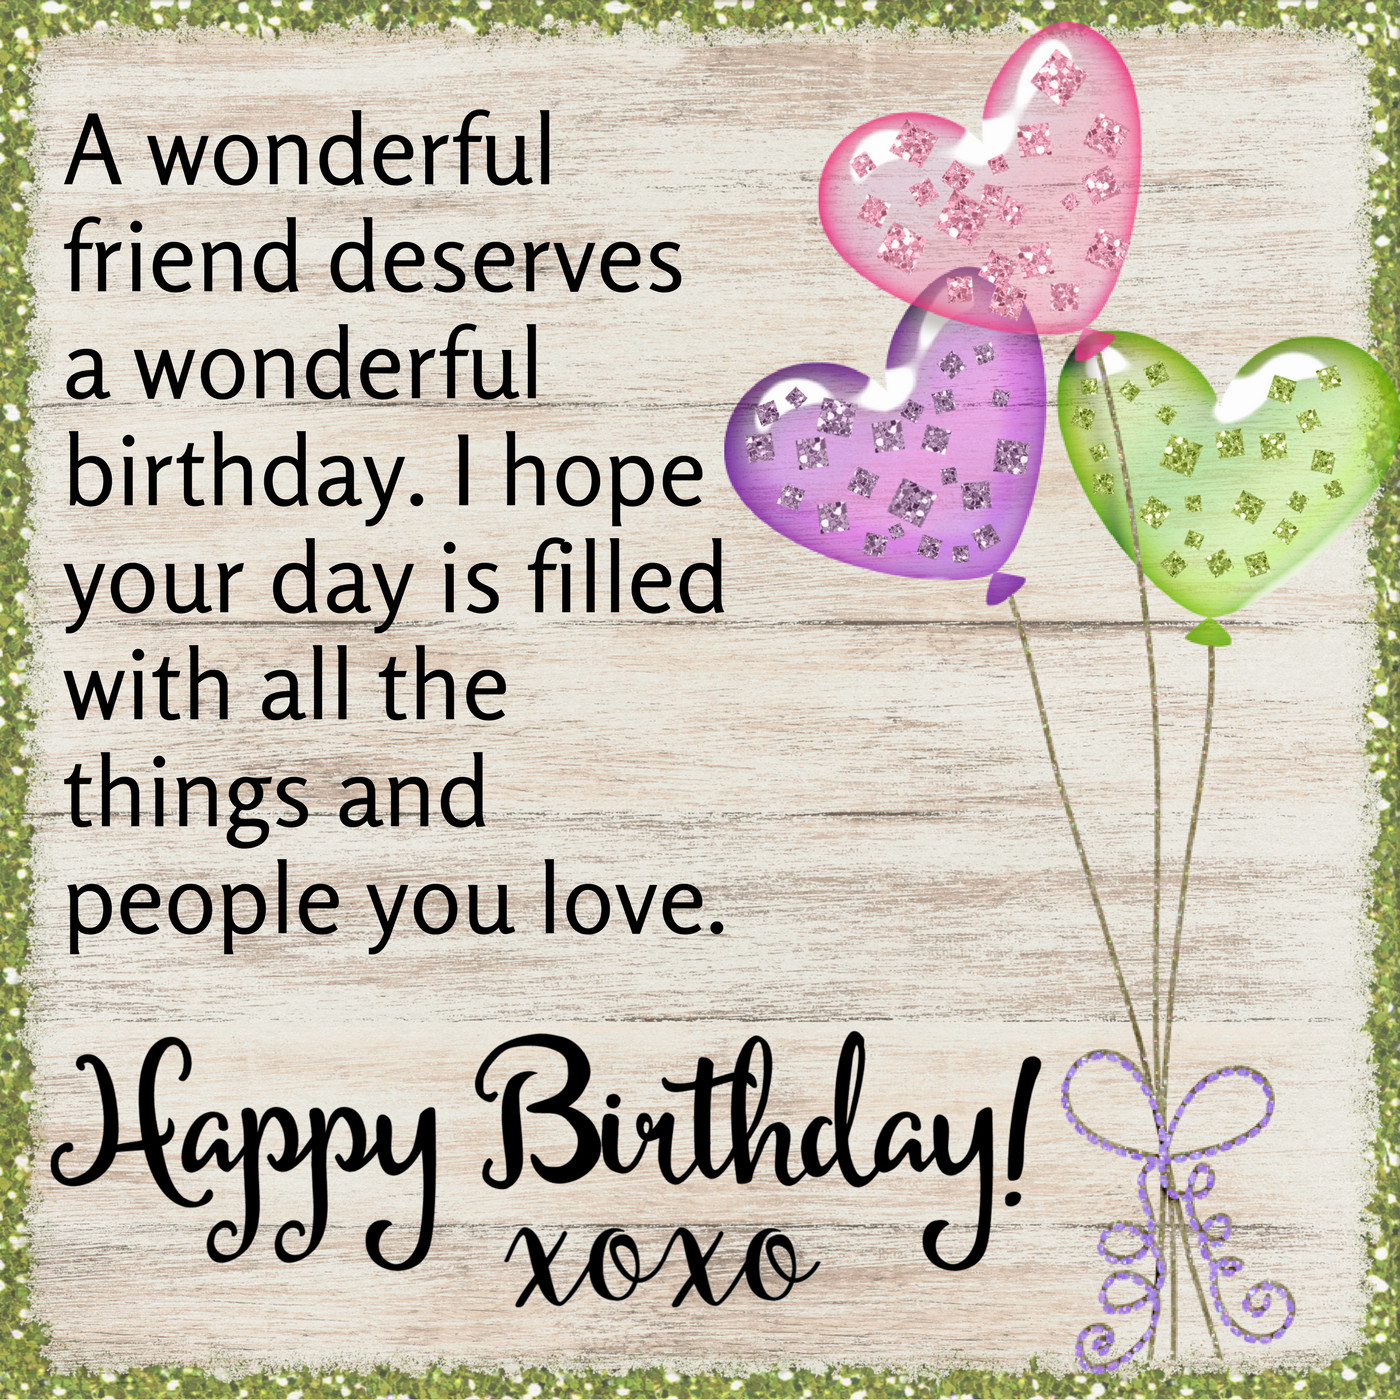 Happy Birthday Friend Images With Quotes
 happybirthday birthday birthdaywishes wonderful